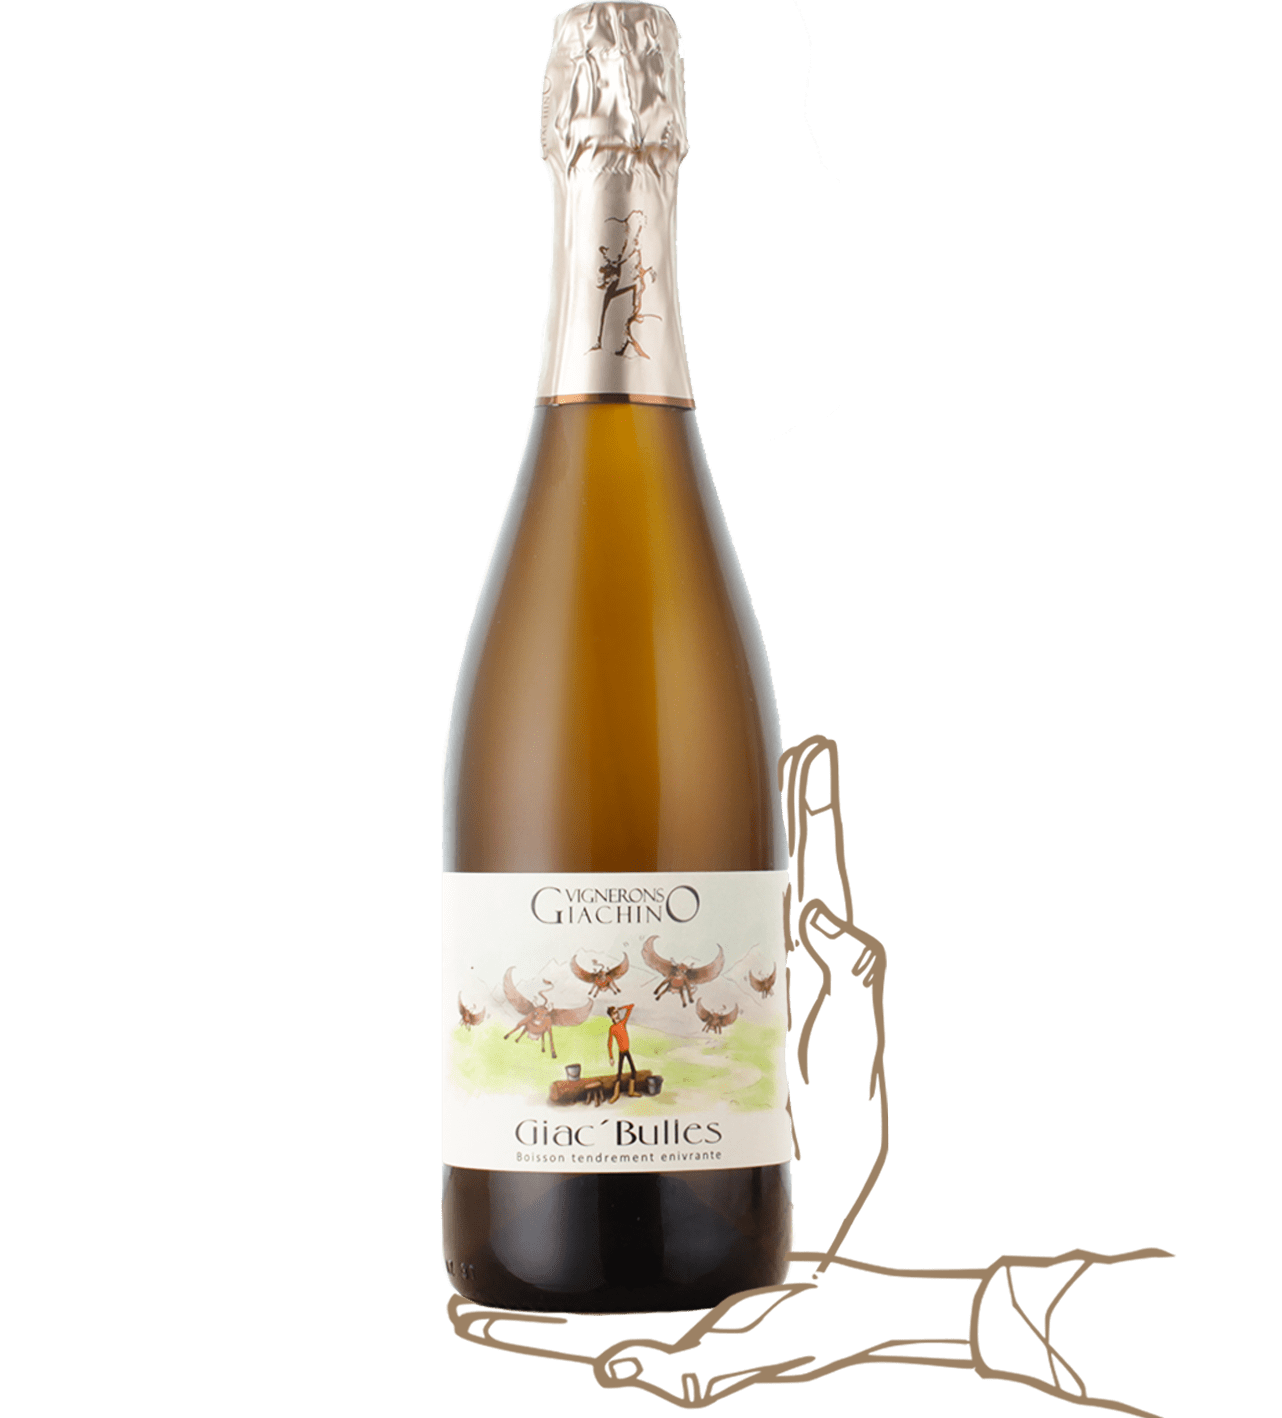 Giac bulle is a pet nat by domaine giachino from savoie